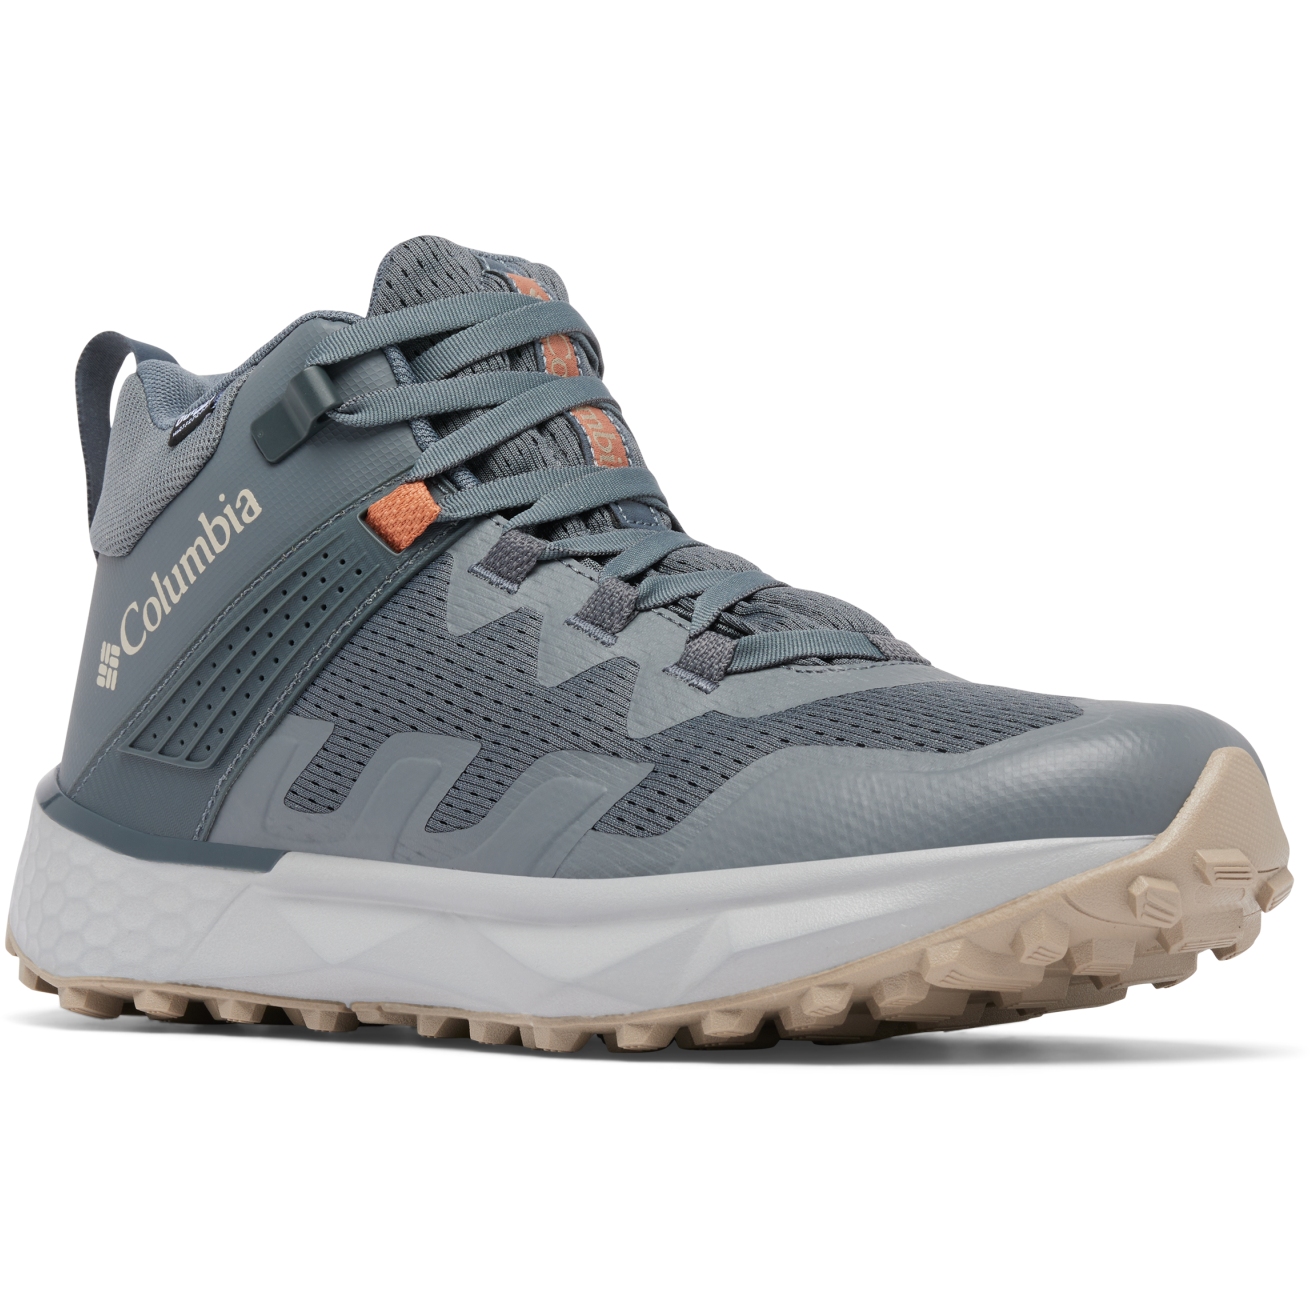 Picture of Columbia Facet 75 Mid Outdry Hiking Shoes Men - Graphite/Canvas Tan